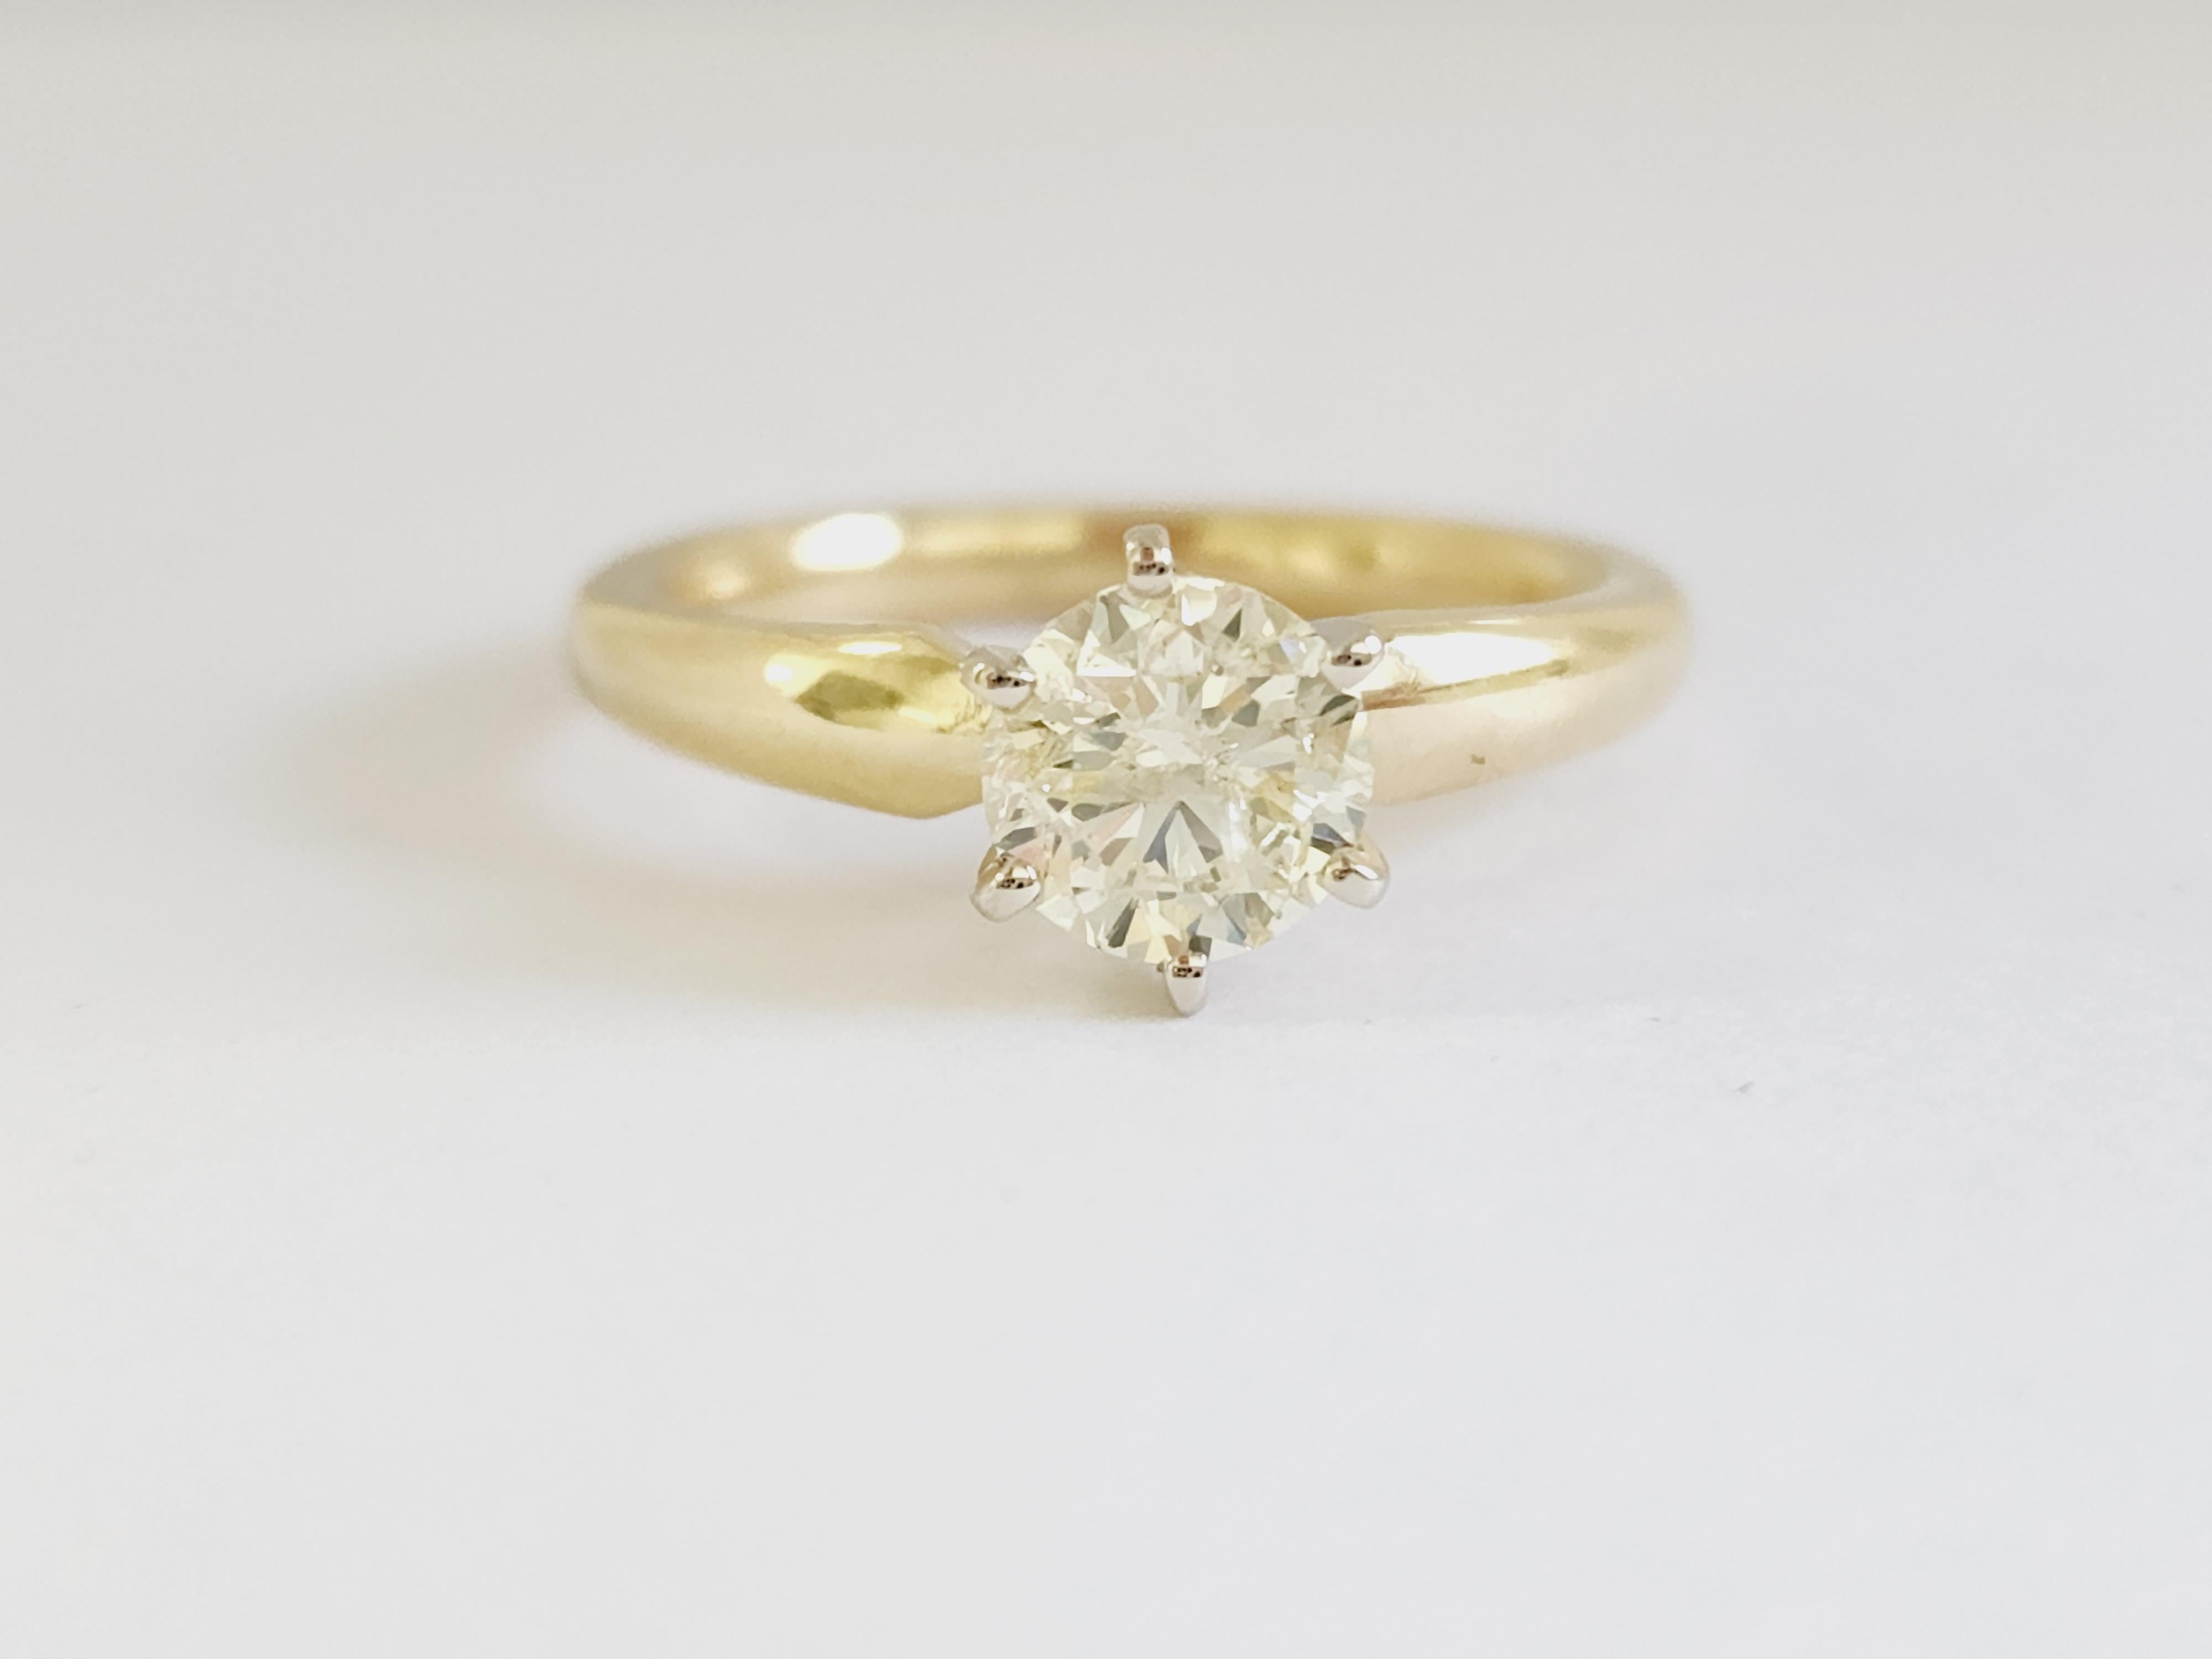 1.01 ct round brilliant cut natural diamonds. 6 prong solitaire setting, set in 14k yellow gold. Ring Size 6.5